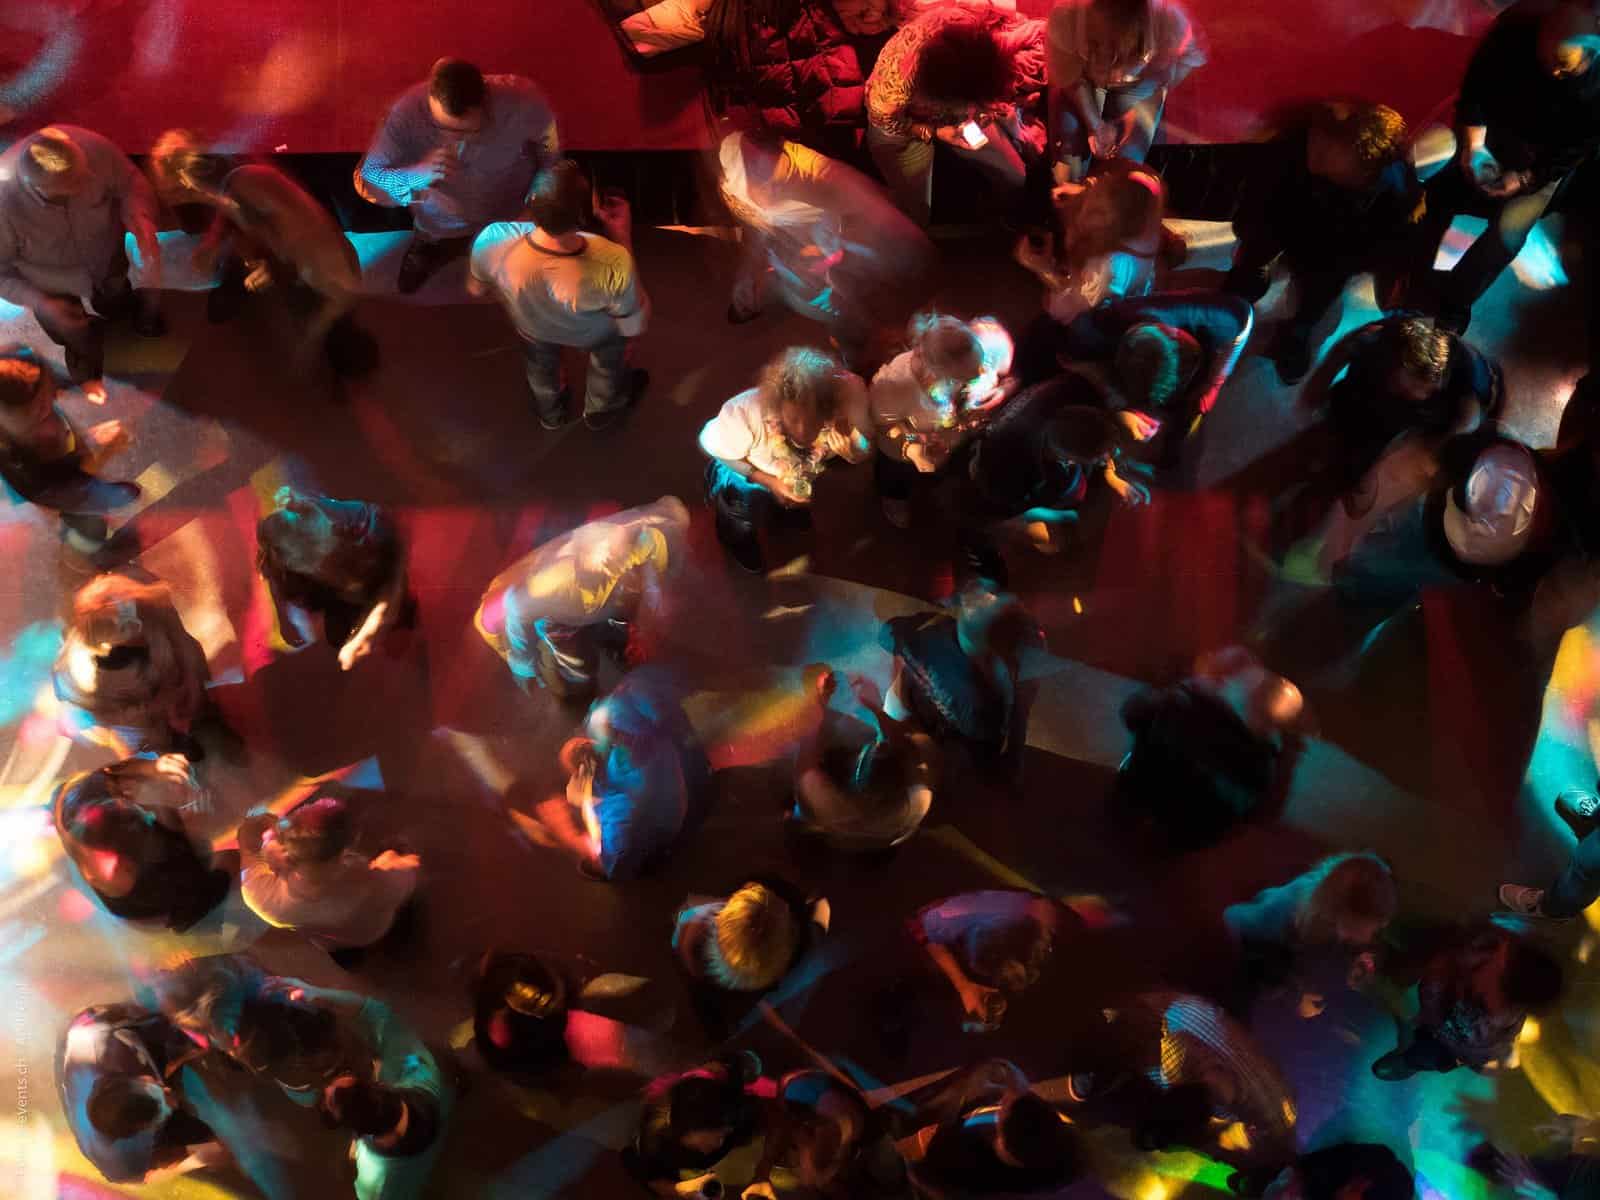 People gathered at an event are seen from above and are blurred in an abstract manner.